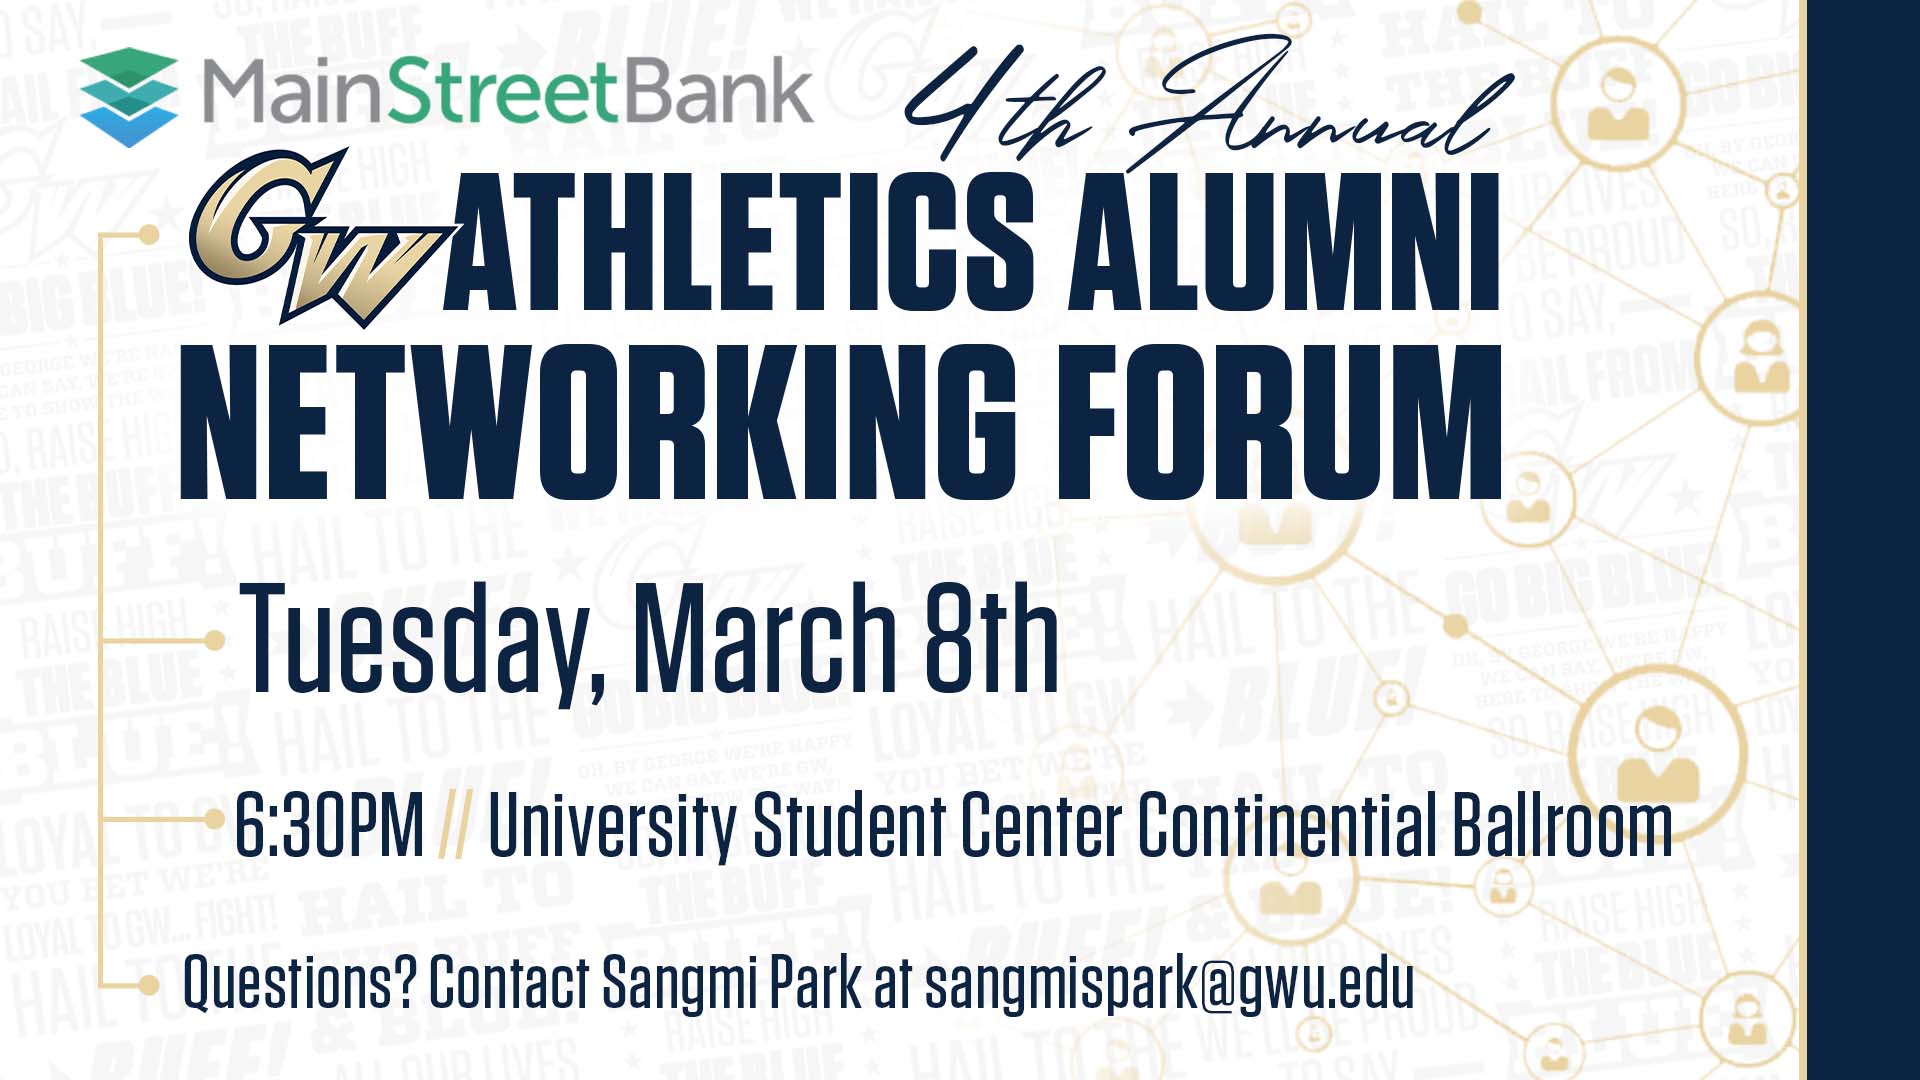 Gwu Academic Calendar 2022 Gw Sports On Twitter: "Calling All Alumni! Join Us For The 4Th Annual Gw  Athletics Alumni Networking Forum With Current Student-Athletes To Discuss  Potential Internships, Career Paths And Job Placement. Register:  Https://T.co/Ncwdfykloc #